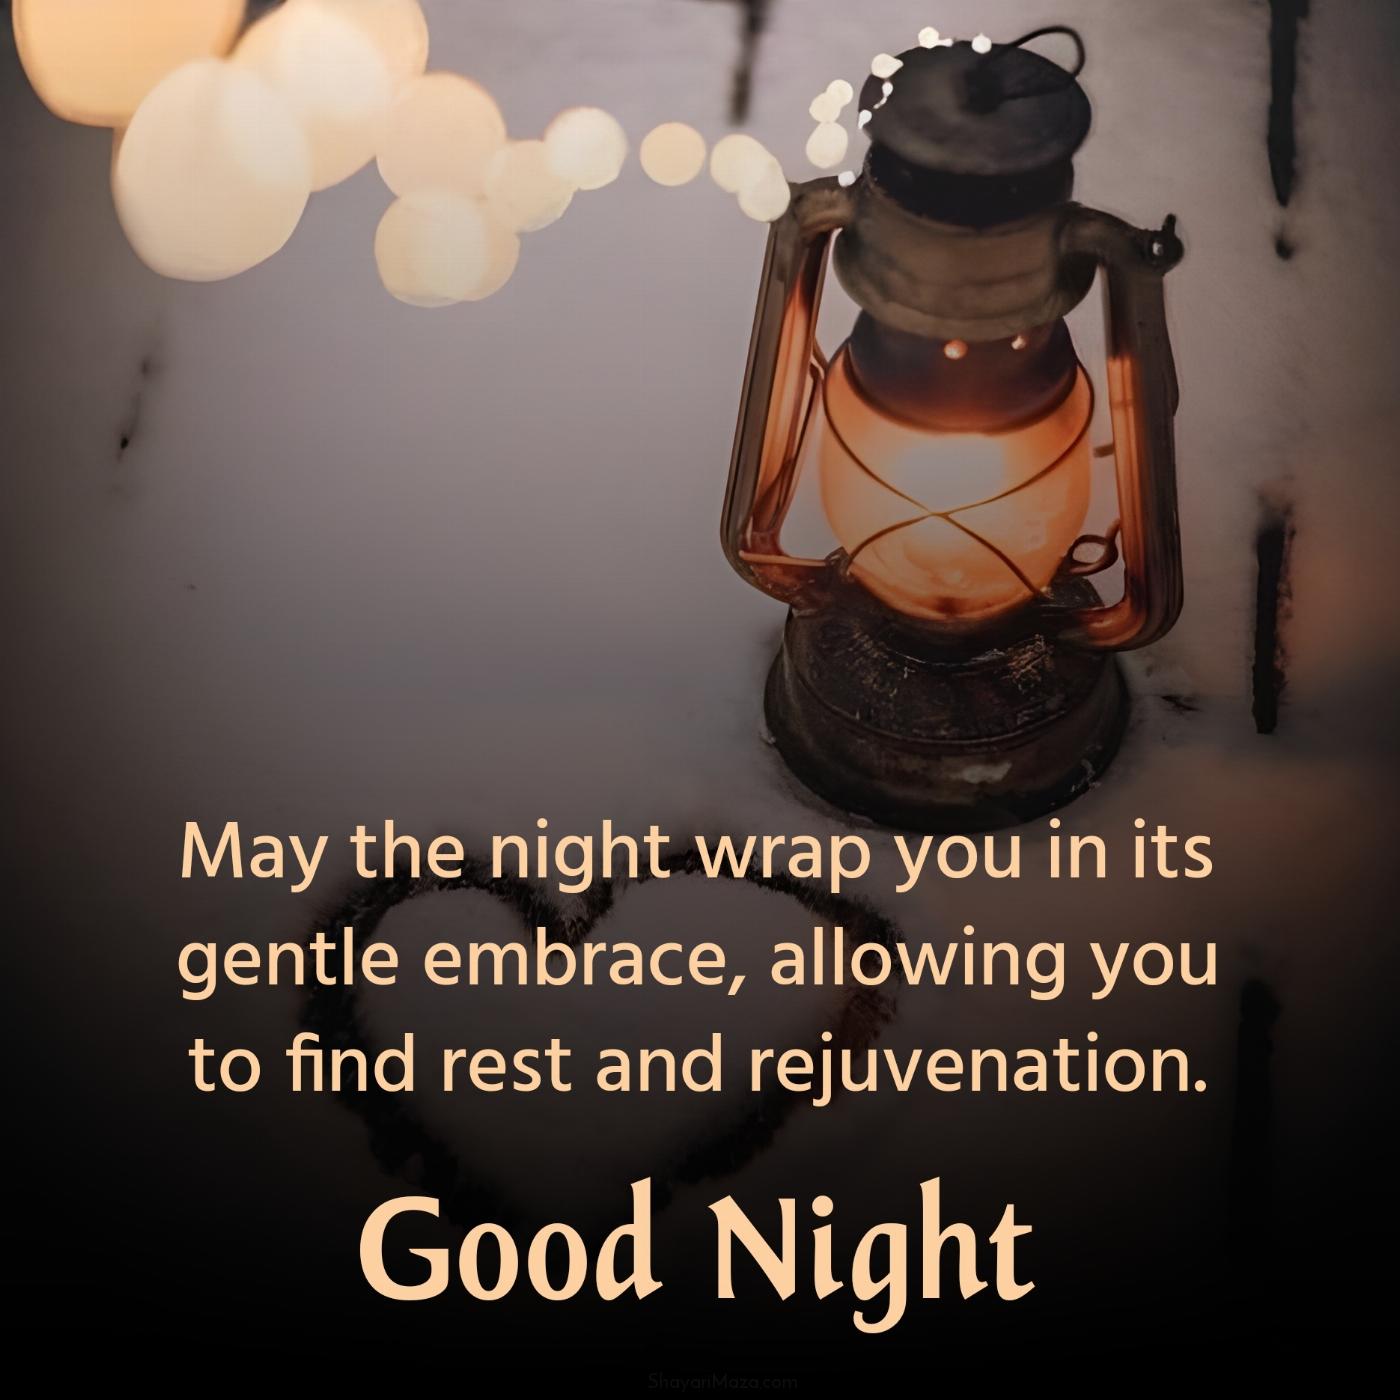 May the night wrap you in its gentle embrace